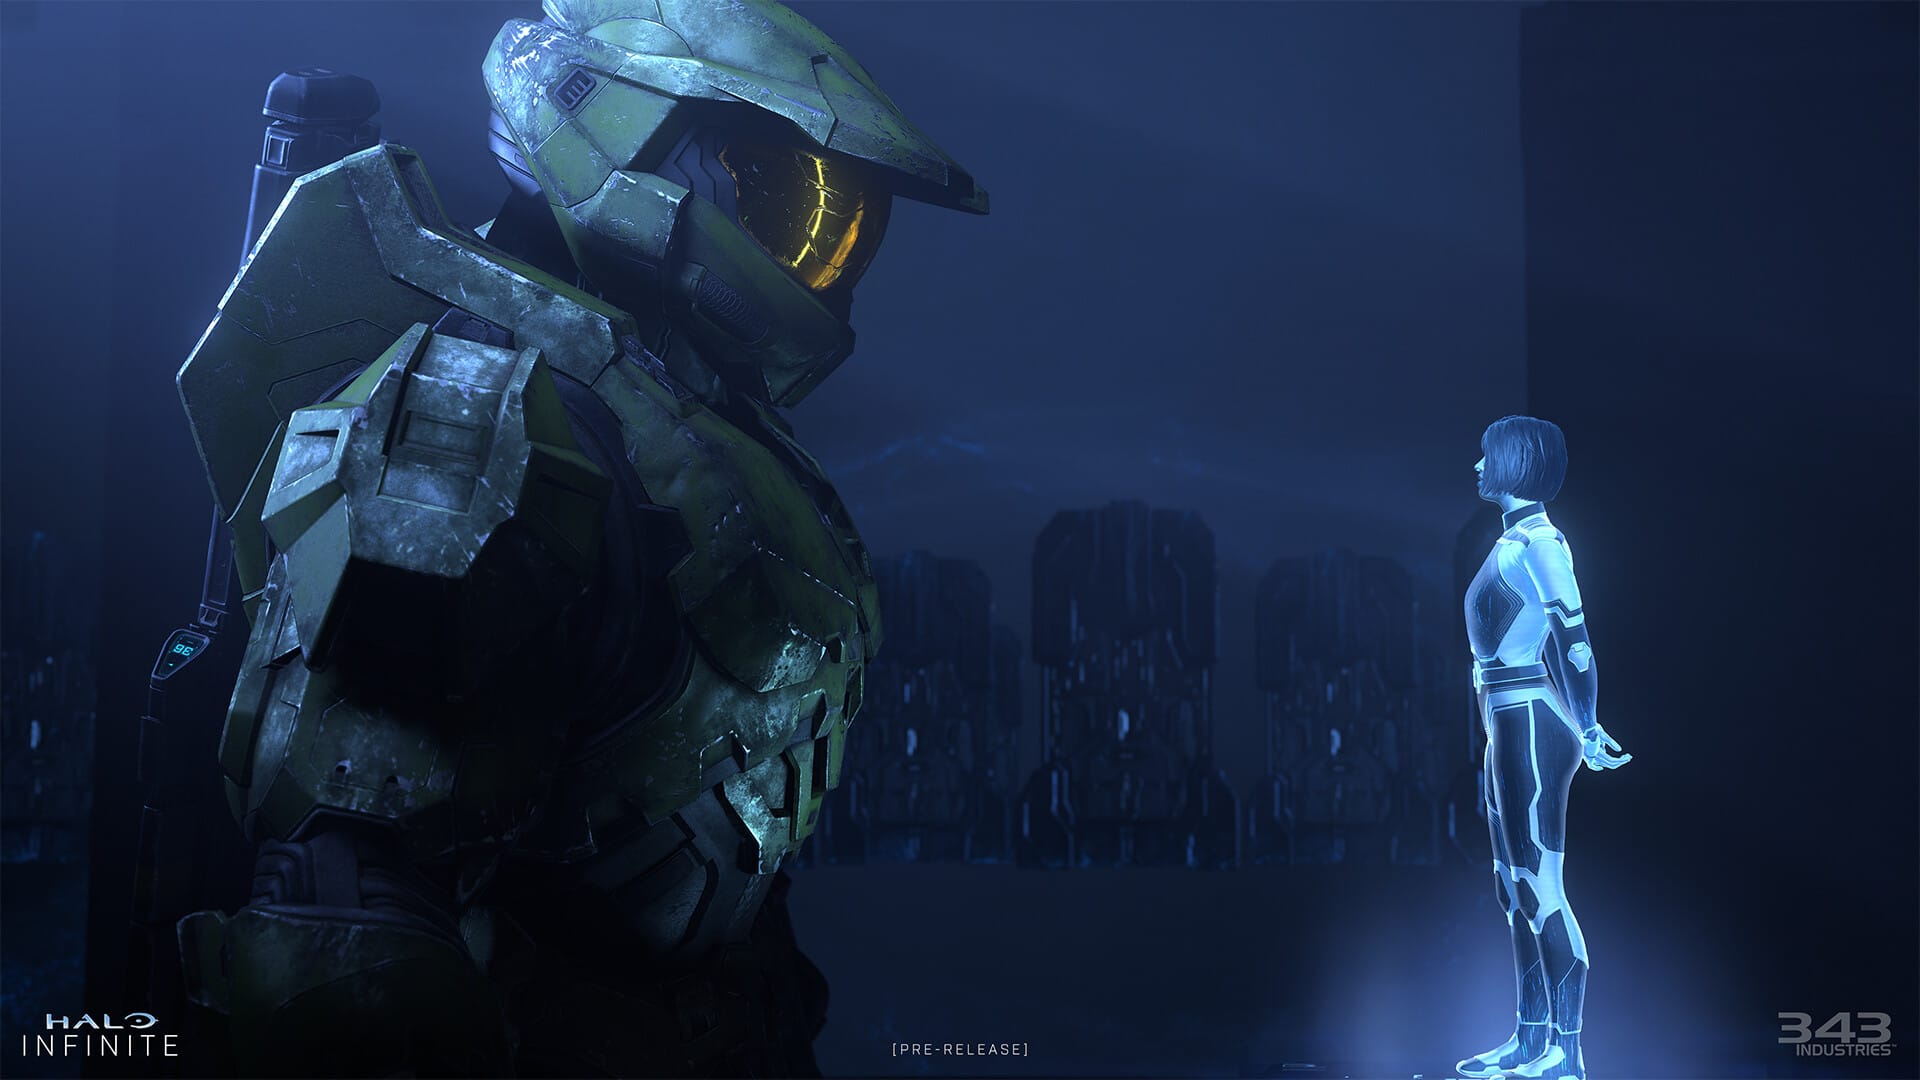 A screen shot from the video game Halo Infinite.